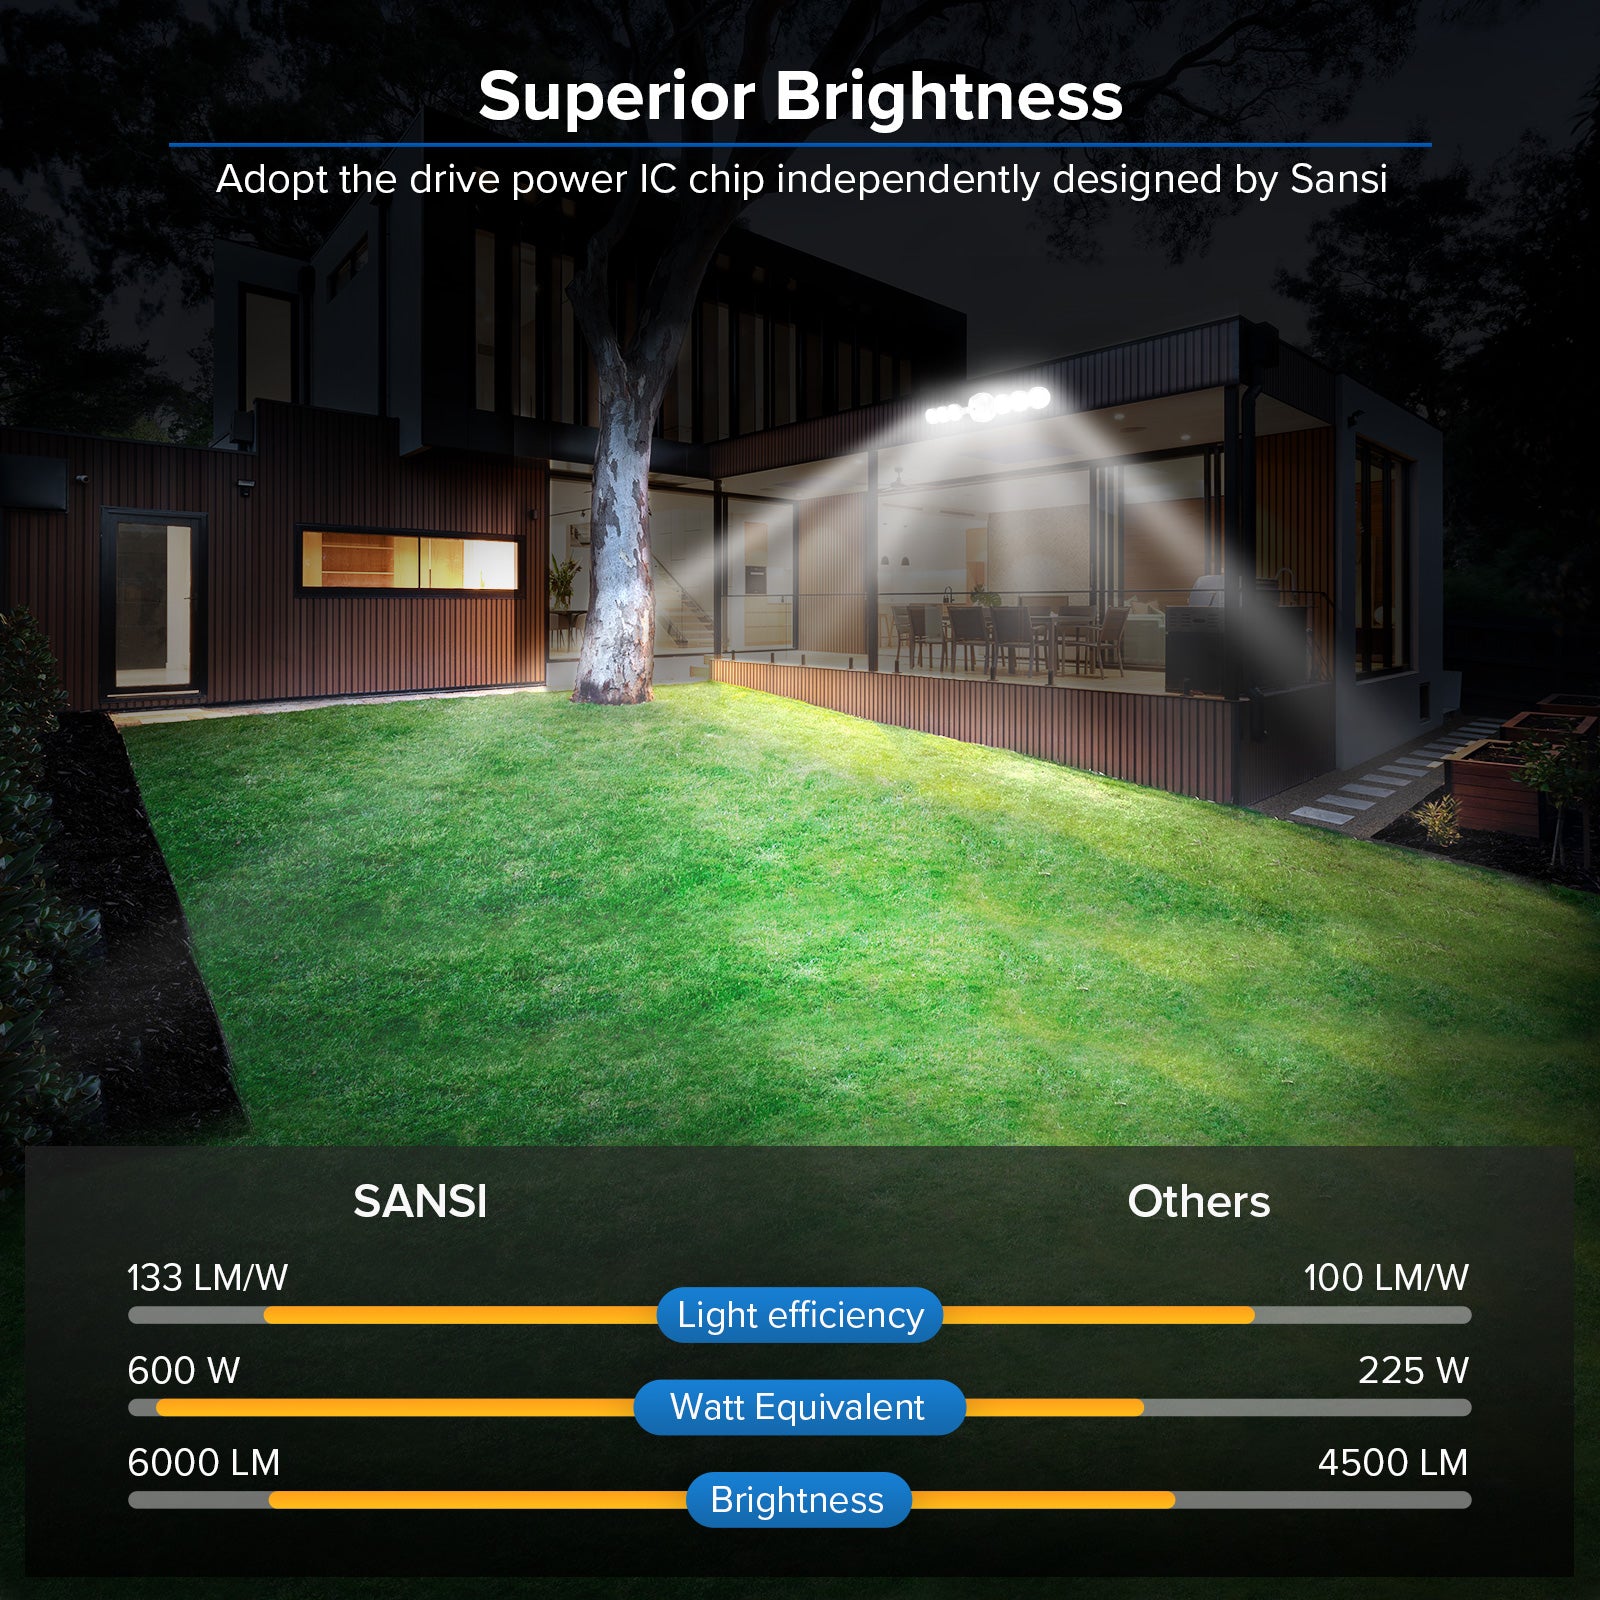 45W LED Security Light (Switch Controlled) with the drive power IC chip independently designed by SANSI, superior brightness